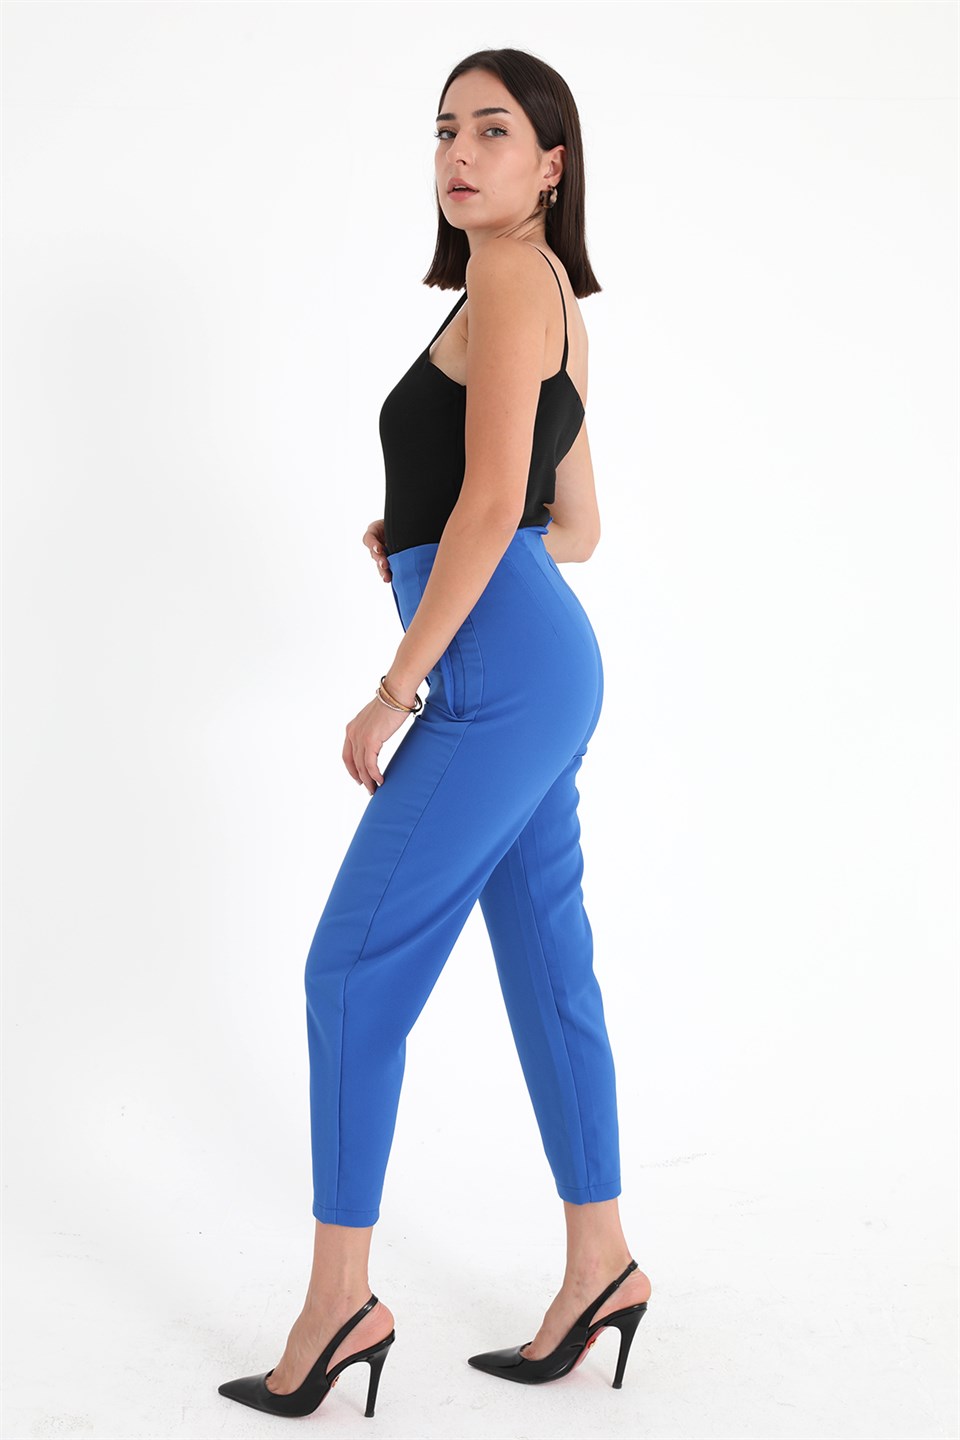 Women's High Waist Stretched Atlas Fabric Trousers - Sax Blue - STREETMODE ™